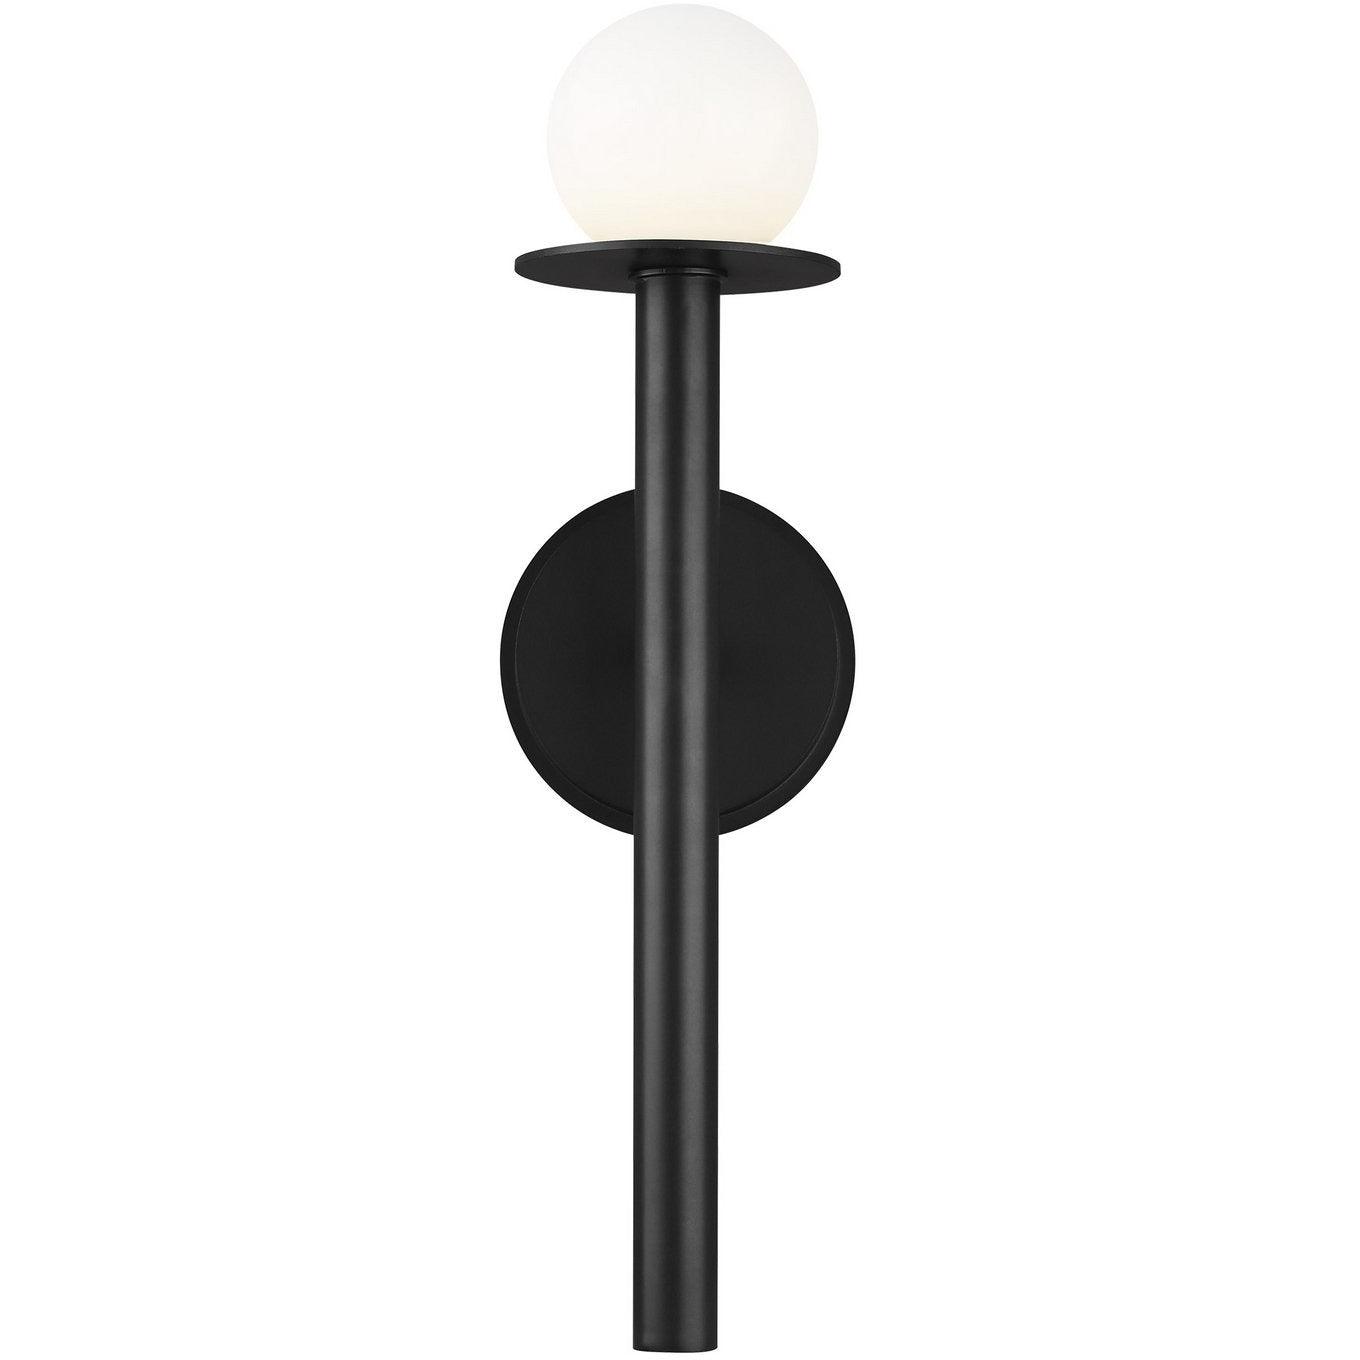 Visual Comfort Studio Collection - Nodes Wall Sconce - KW1001MBK | Montreal Lighting & Hardware